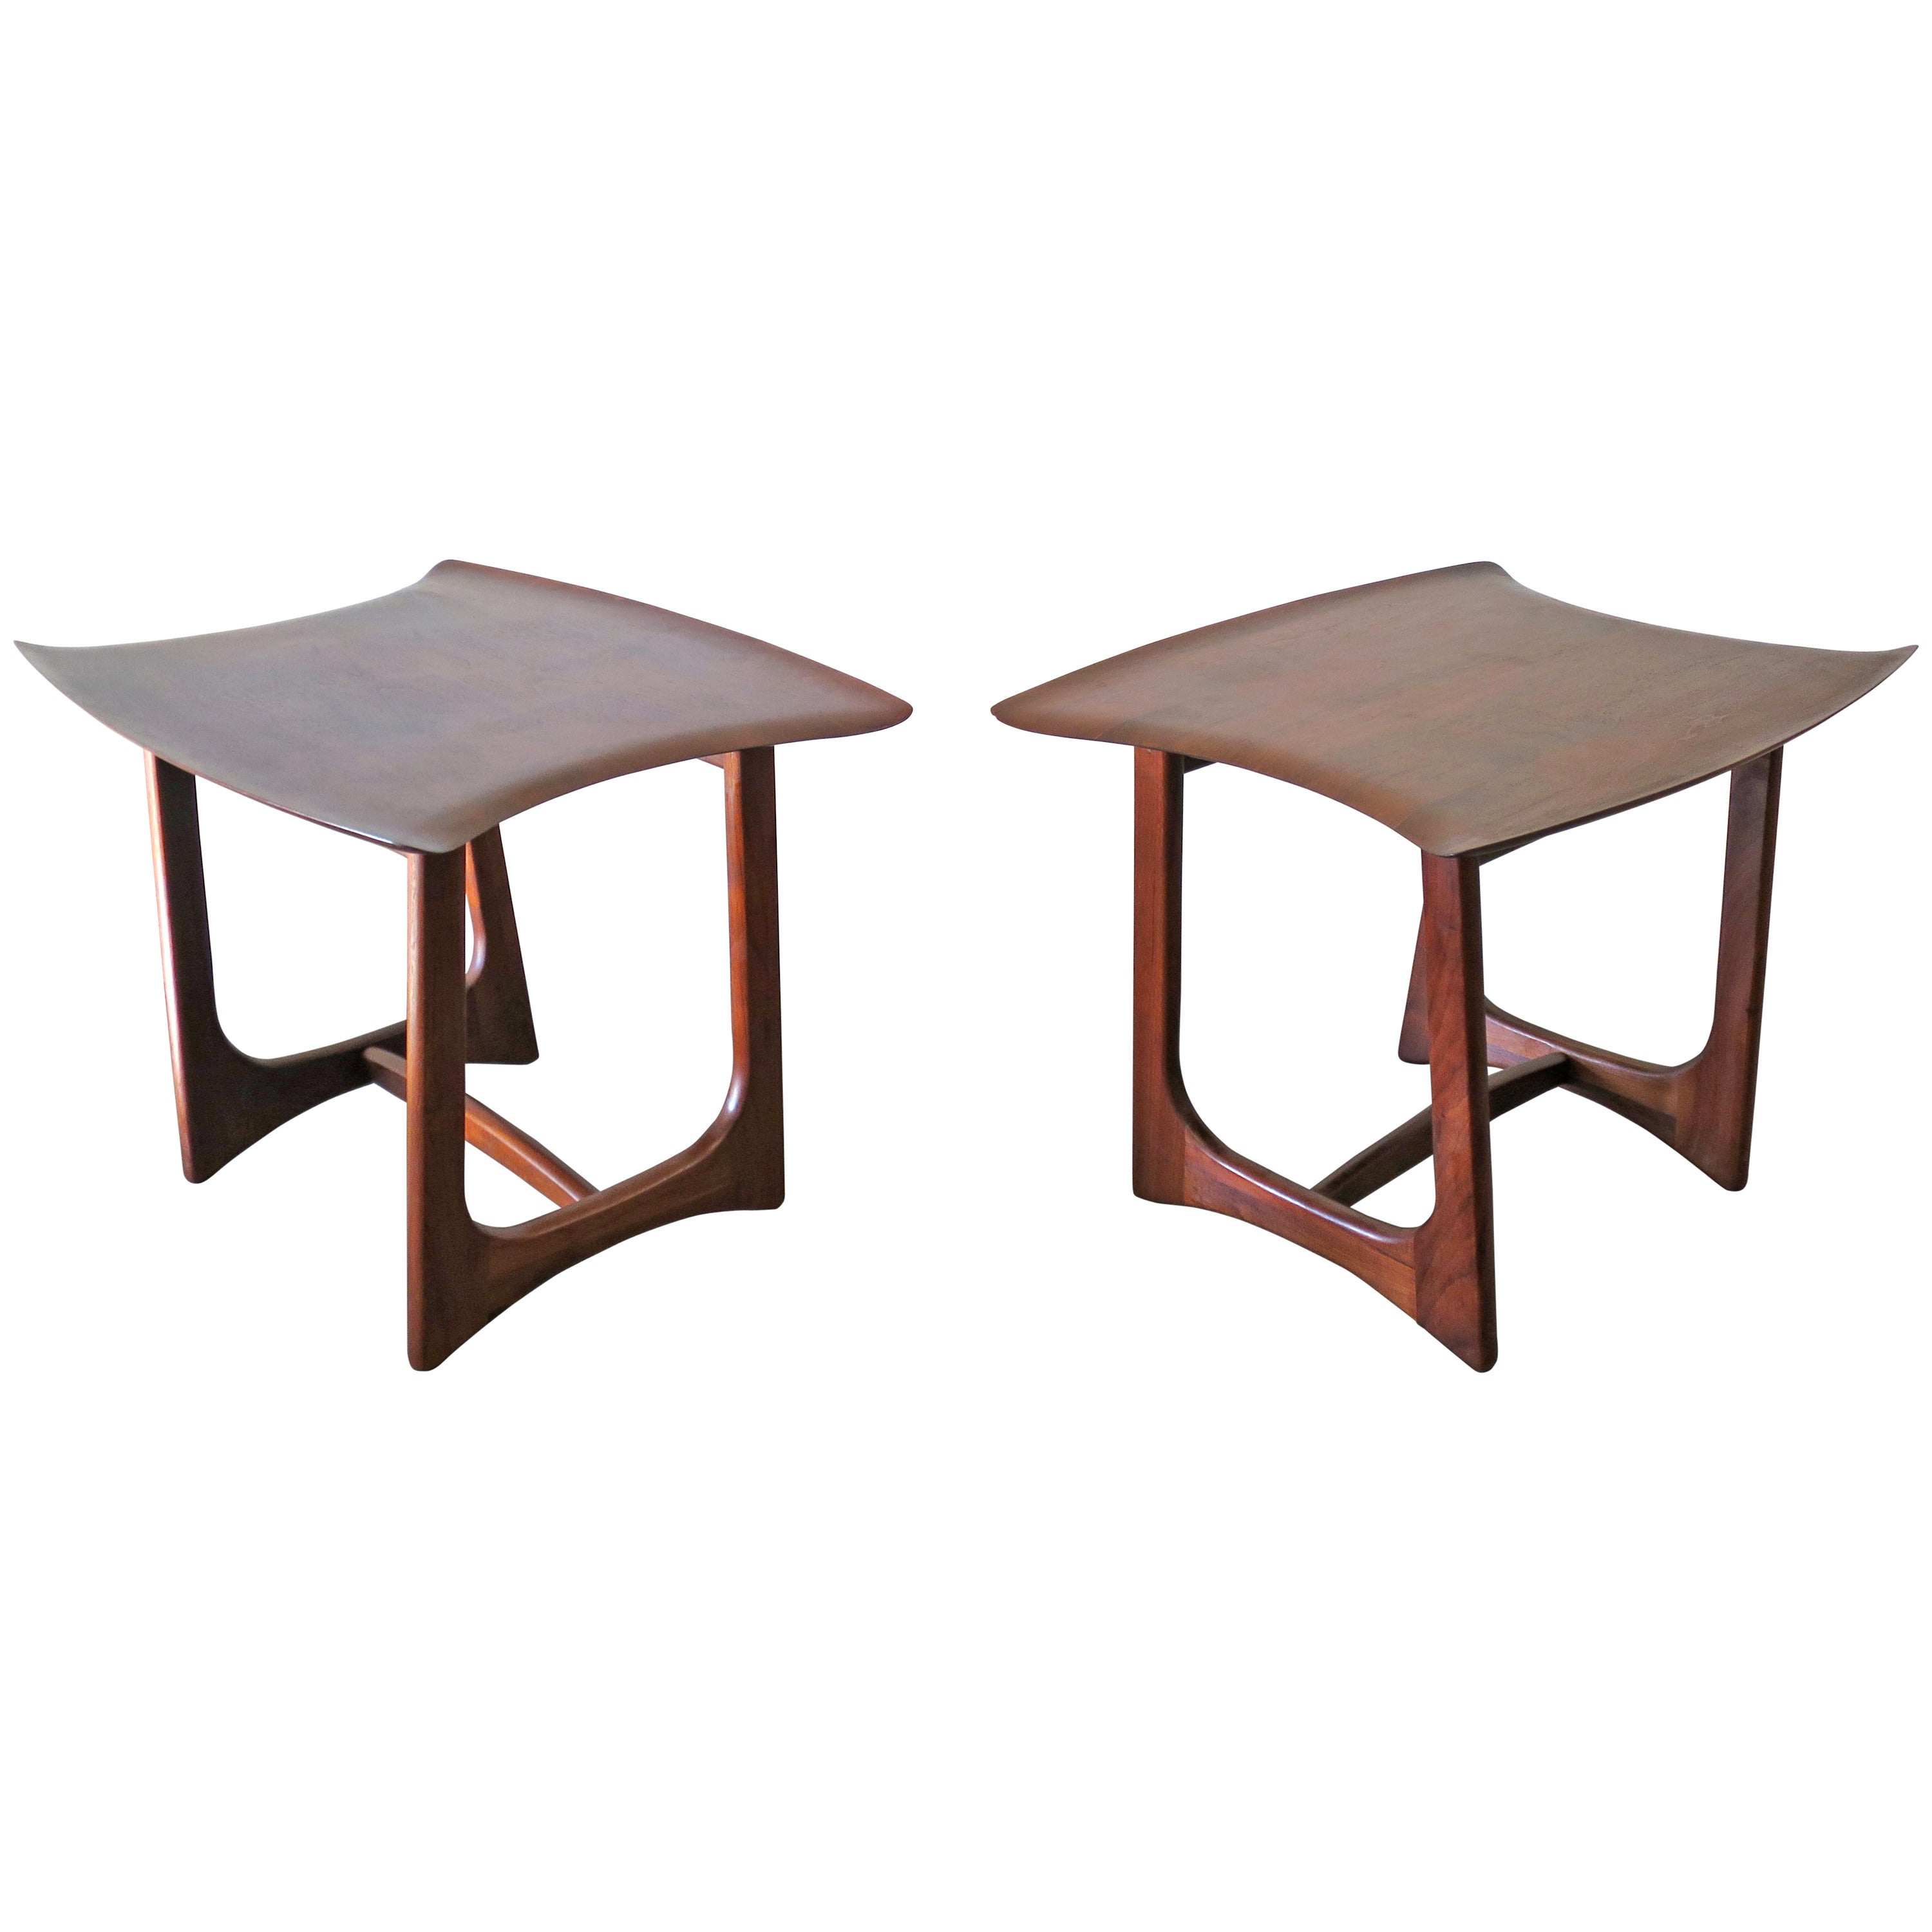 Pair of Adrian Pearsall Stingray Tables